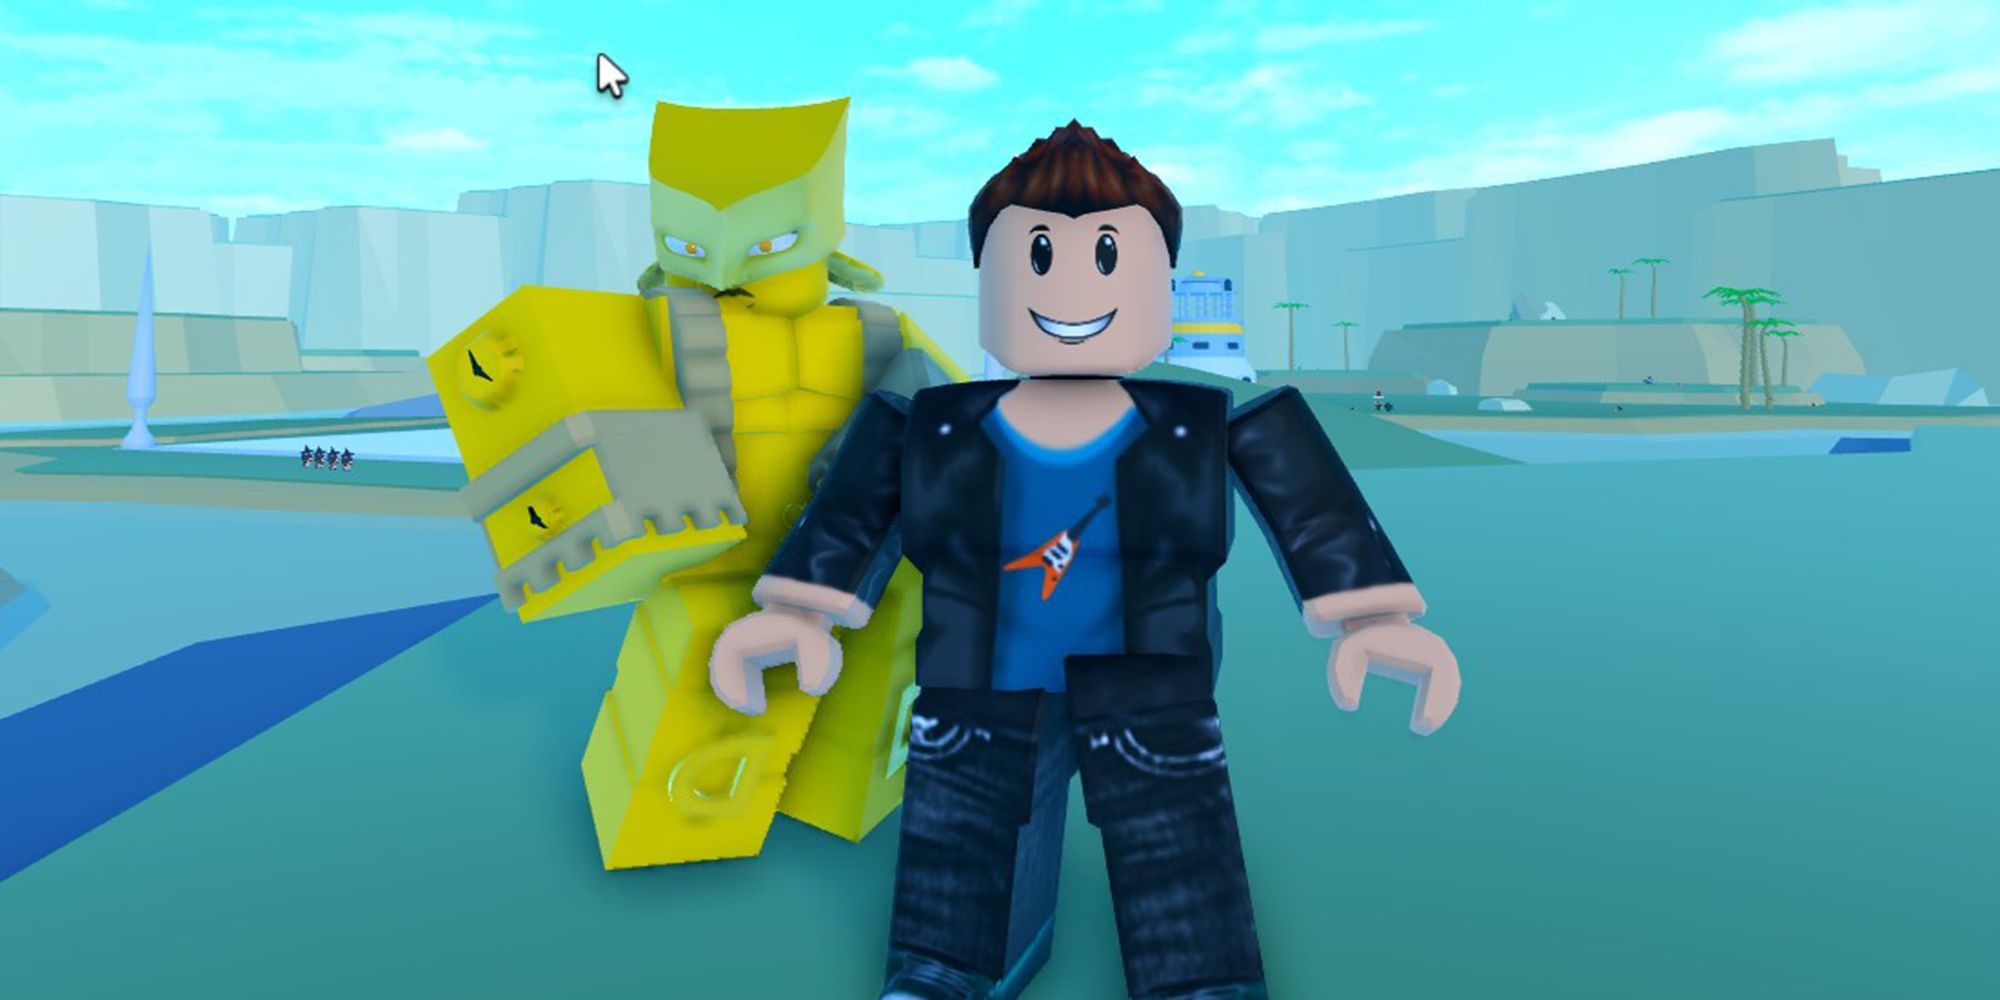 A Universal Time - Roblox